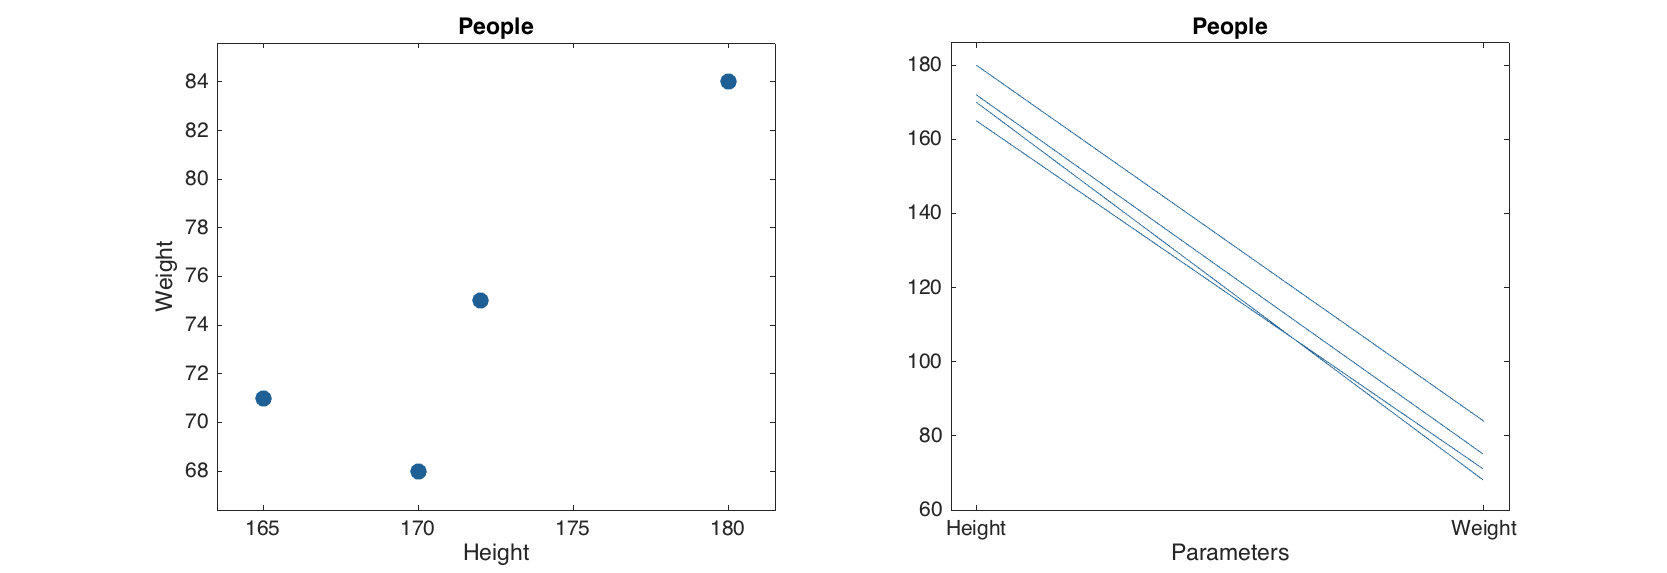 Example of simple plots for a dataset